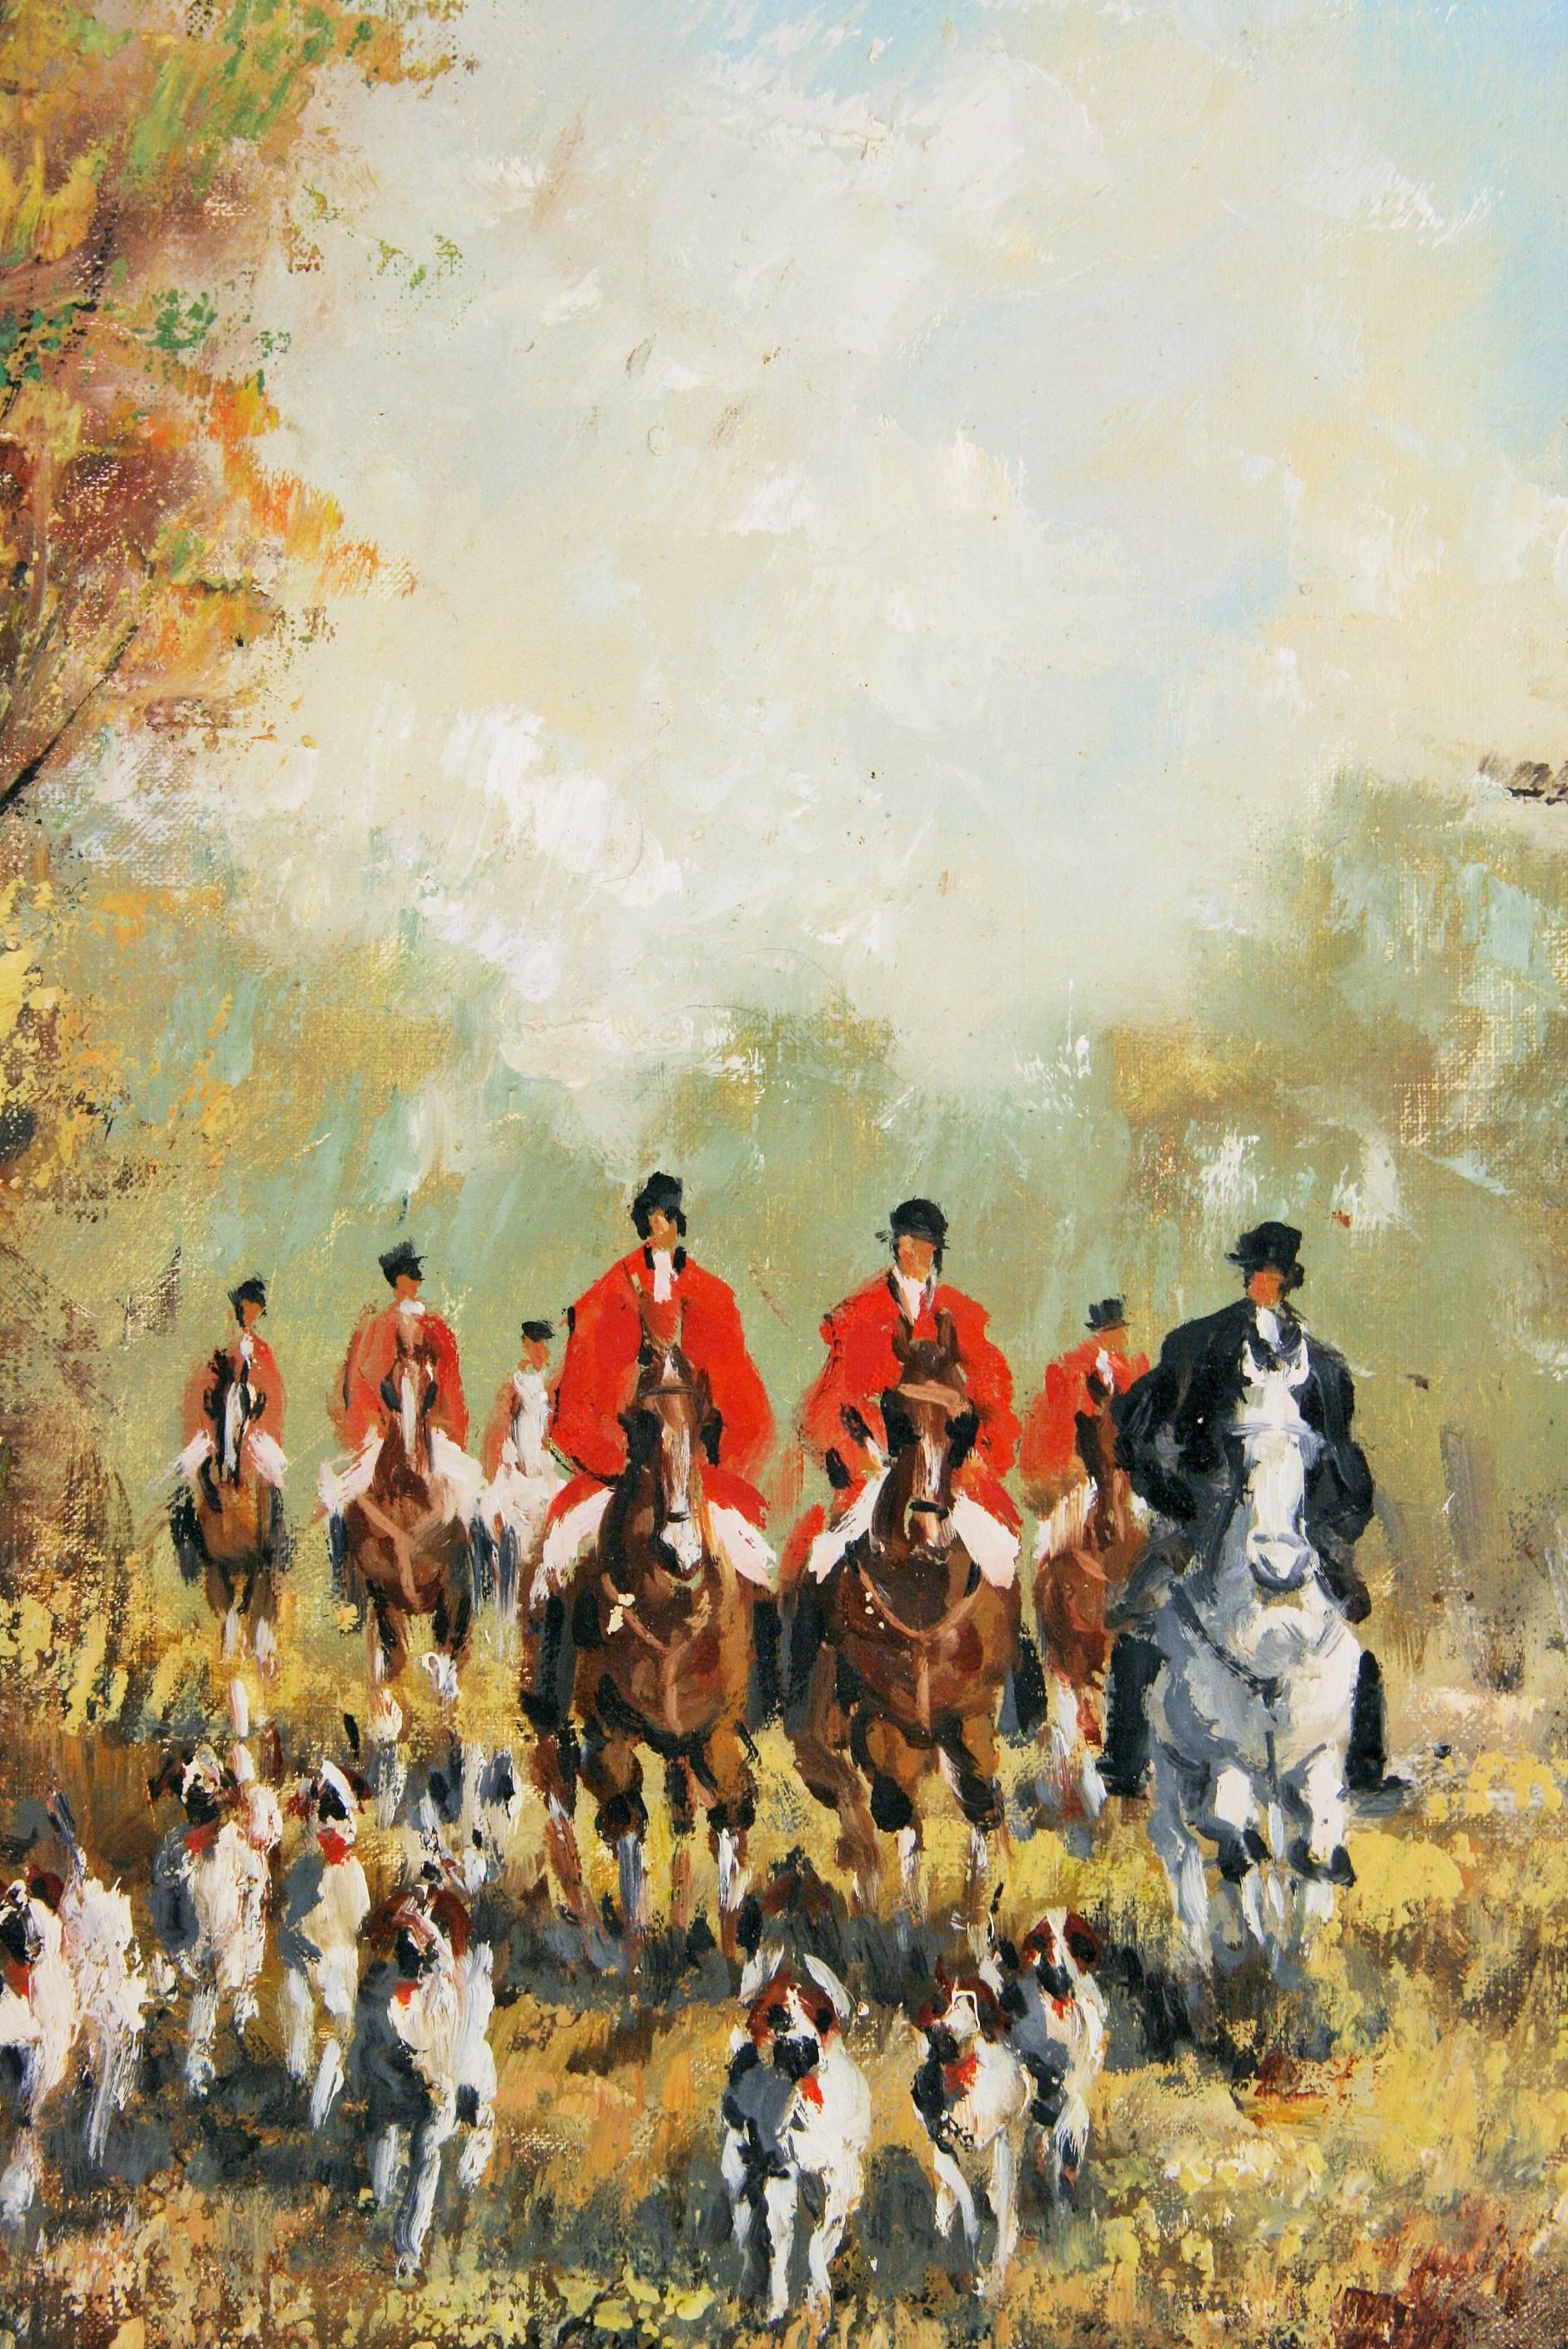 5-2501, fox hunting scene painting. Oil on canvas applied on a wood panel displayed in a dark wood and gilt frame.
Unsigned. Image size 13"; L x 16 "; H.